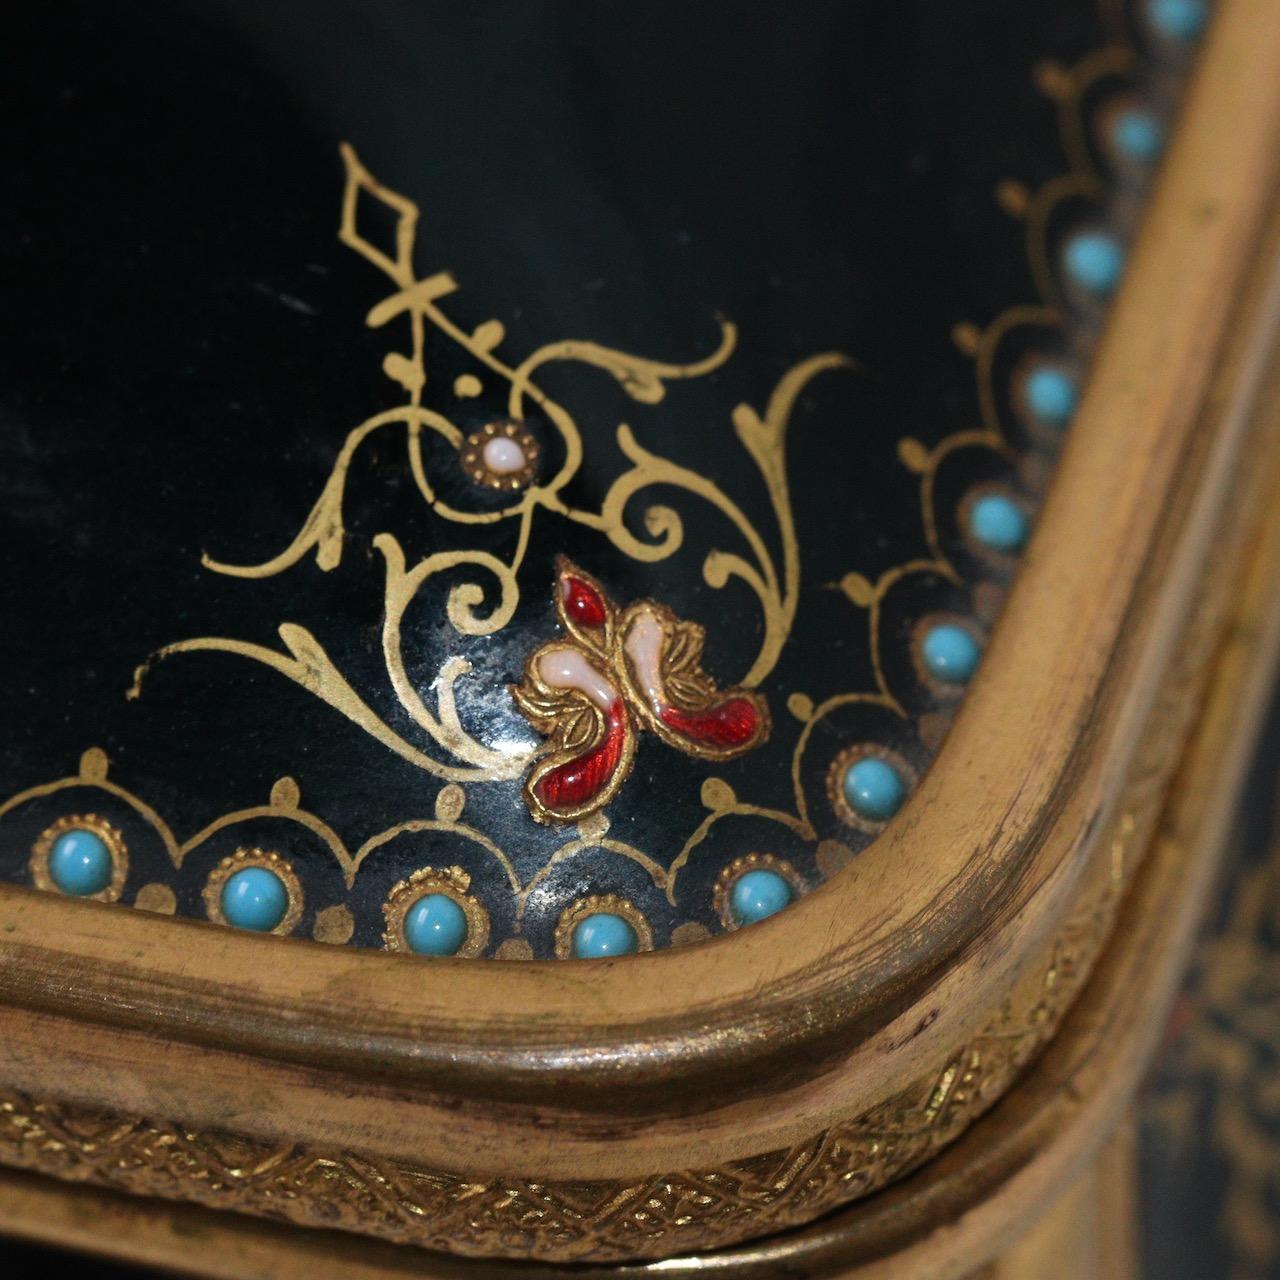 19th Century French Enamel and Ormolu-Mounted Jewelry Casket 5